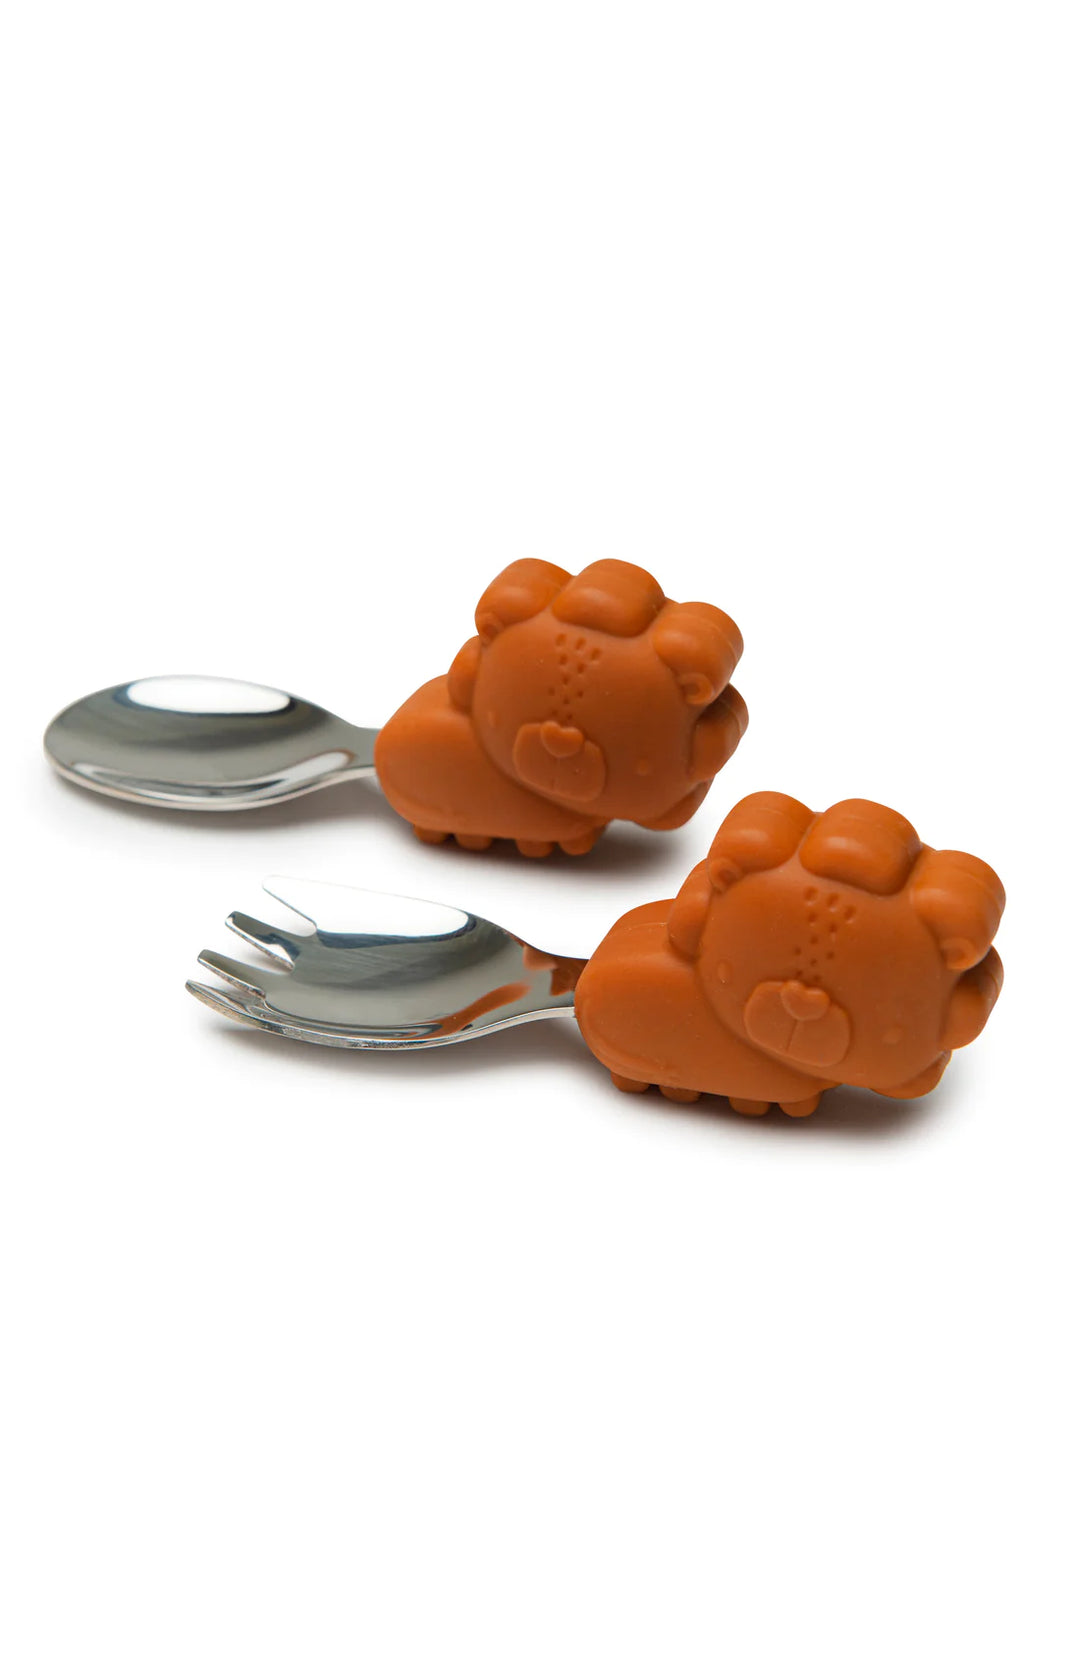 Lion Learning Spoon and Fork Set by Loulou Lollipop